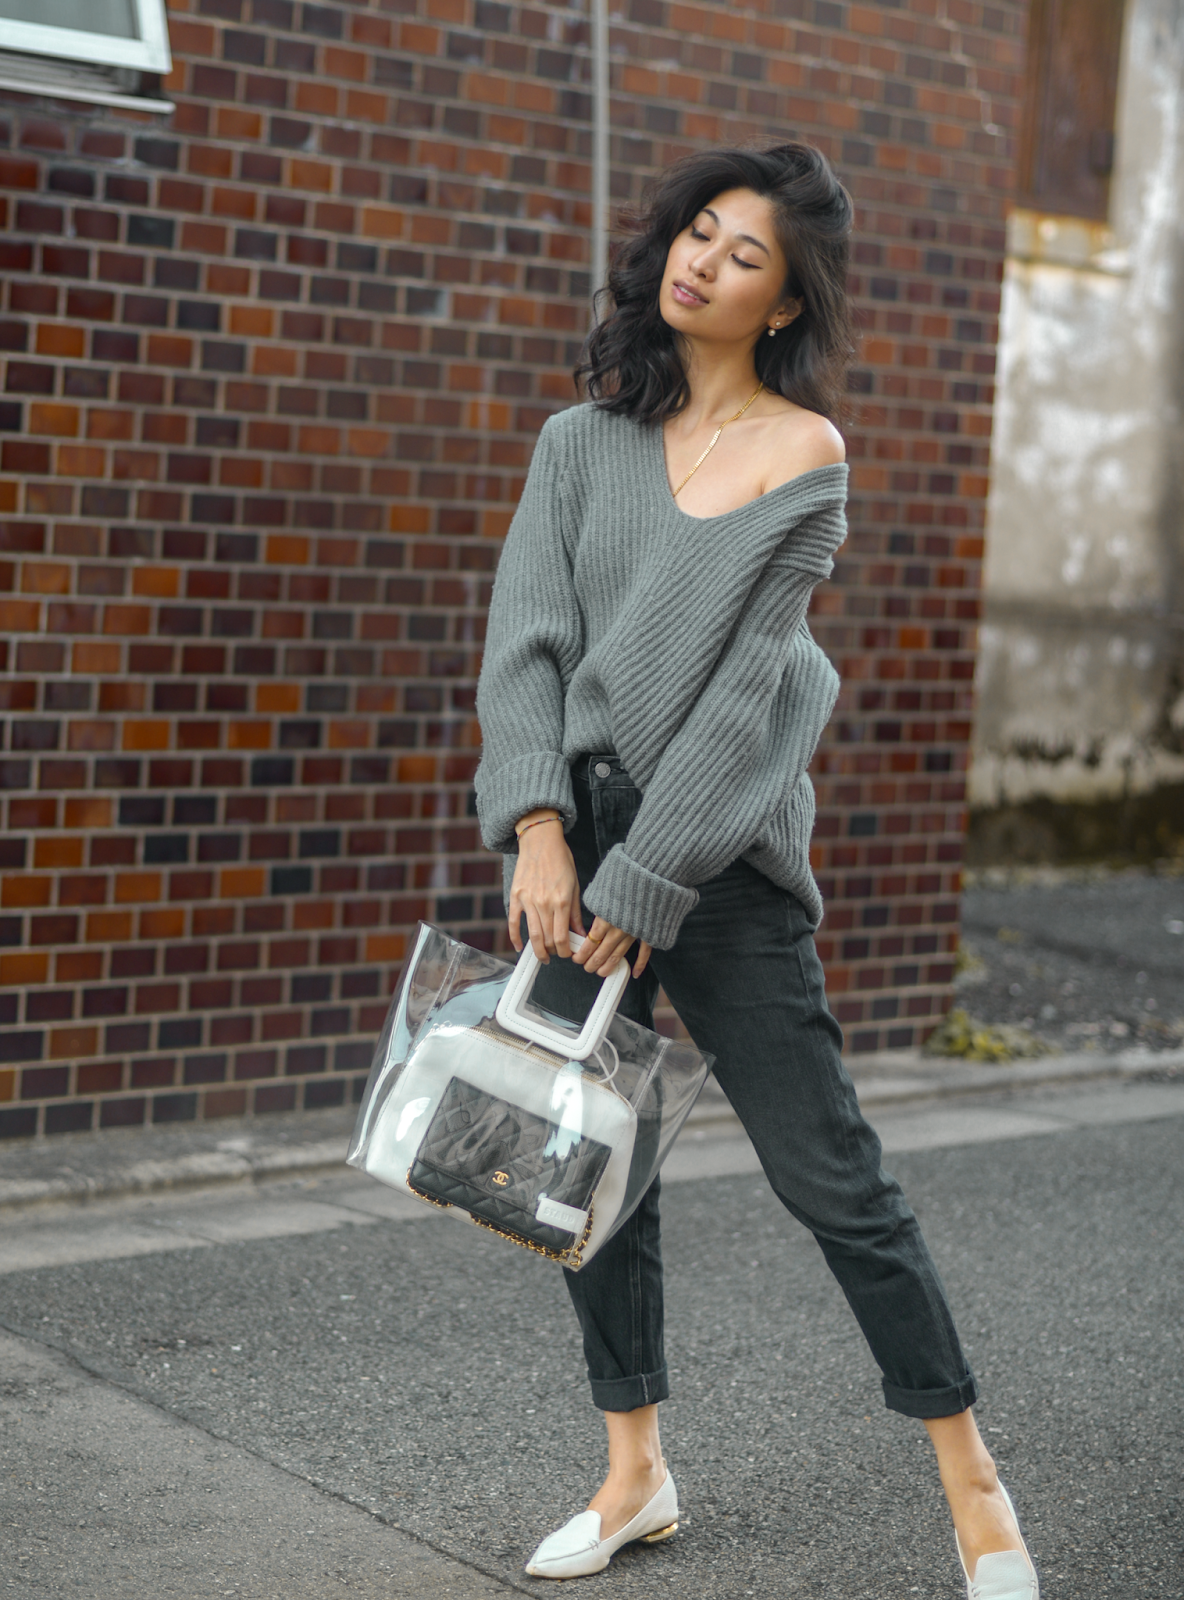 Grey sweater, fall outfits ideas with grey sweater, casual outfits with sweaters, clear PVC bag, Chanel WOC with clear bag, Nicholas Kirkwoods flats outfit ideas, personal style blogger, Tokyo style blogger, New York fashion blog FOREVERVANNY